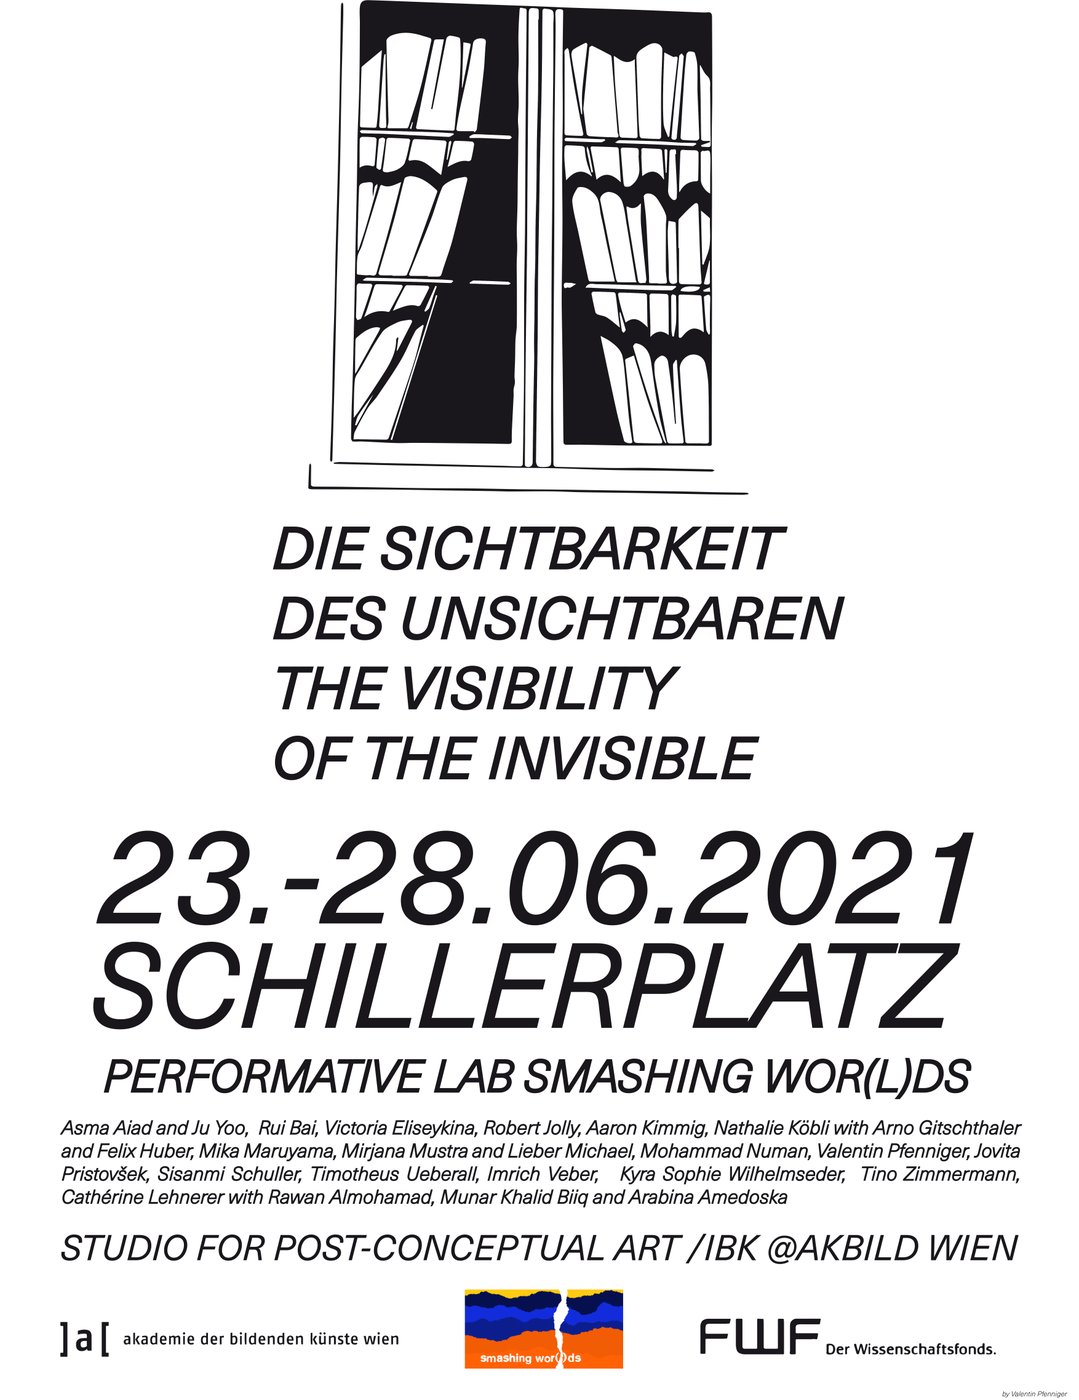 Exhibition and perfomative lab from students of the studio for Post-conceptual Art at the Institute of Fine Arts in cooperation with the
 
  Smashing Wor(l)ds
 
 project.
 


 
  Opening hours:
 
 2 pm - 6 pm, Studio for Post-conceptual Art, Lehargasse 8/I
 
 Works at Schillerplatz on view all day